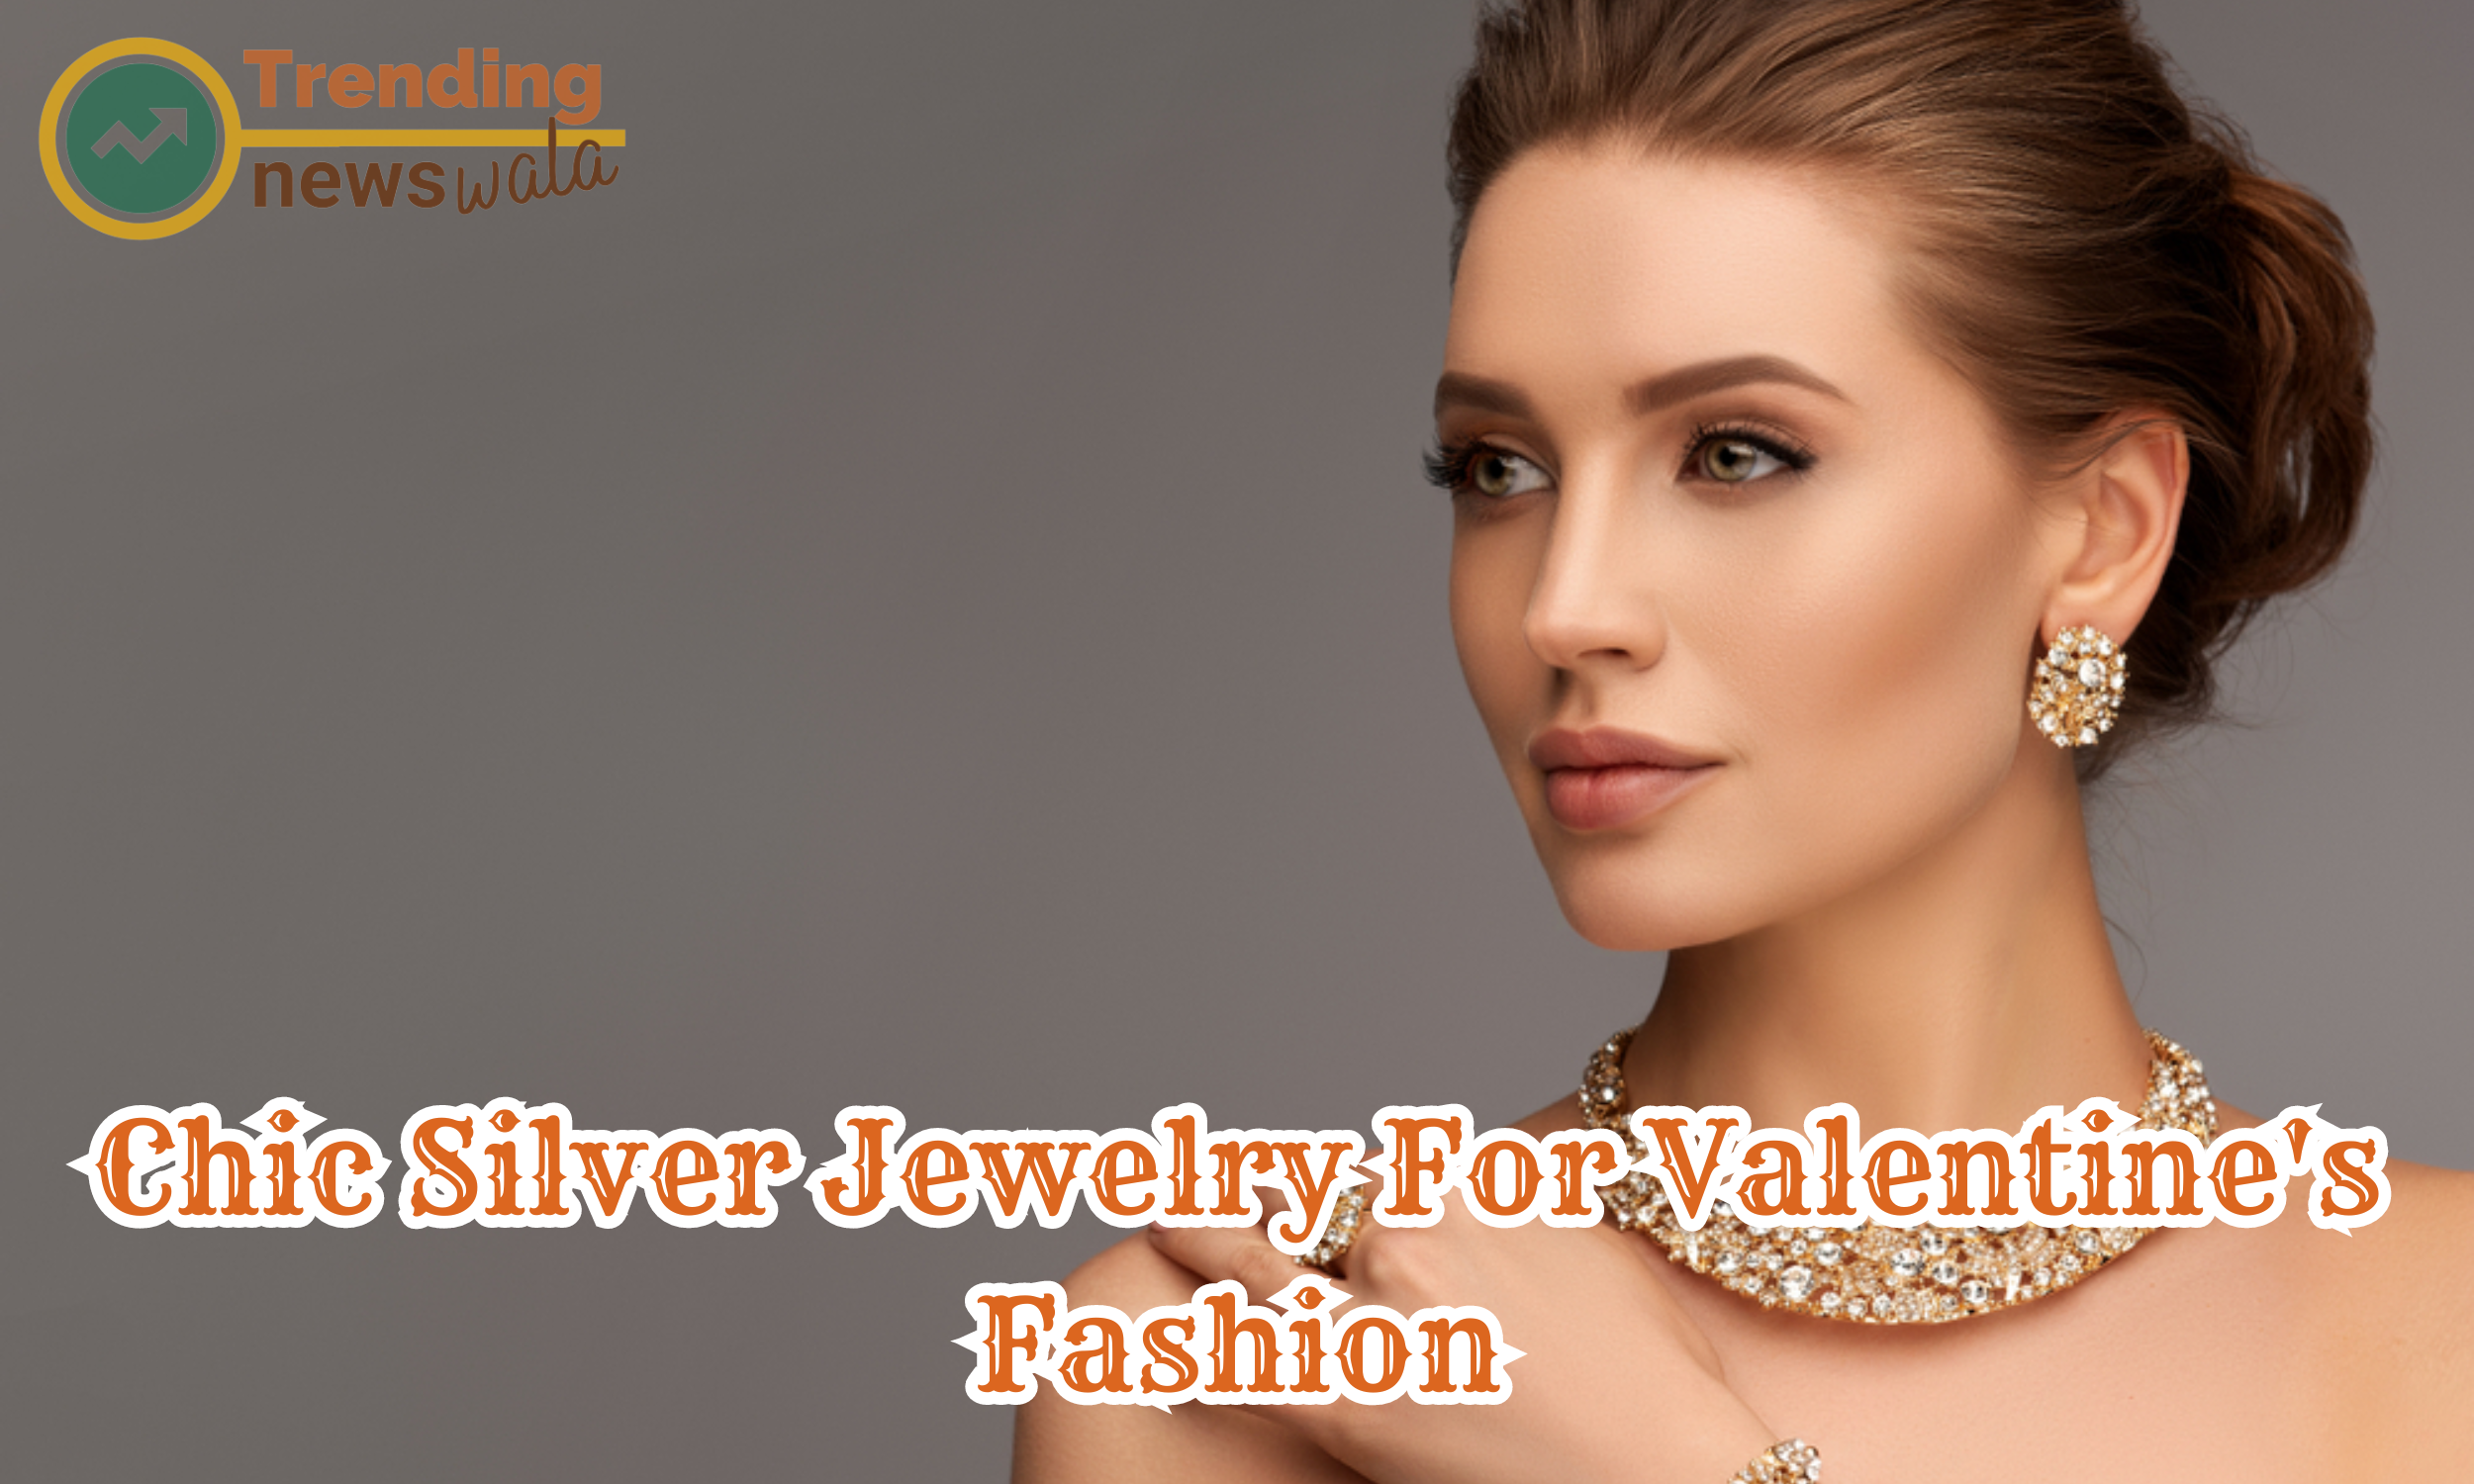 Chic silver jewelry for Valentine's fashion embraces modern trends